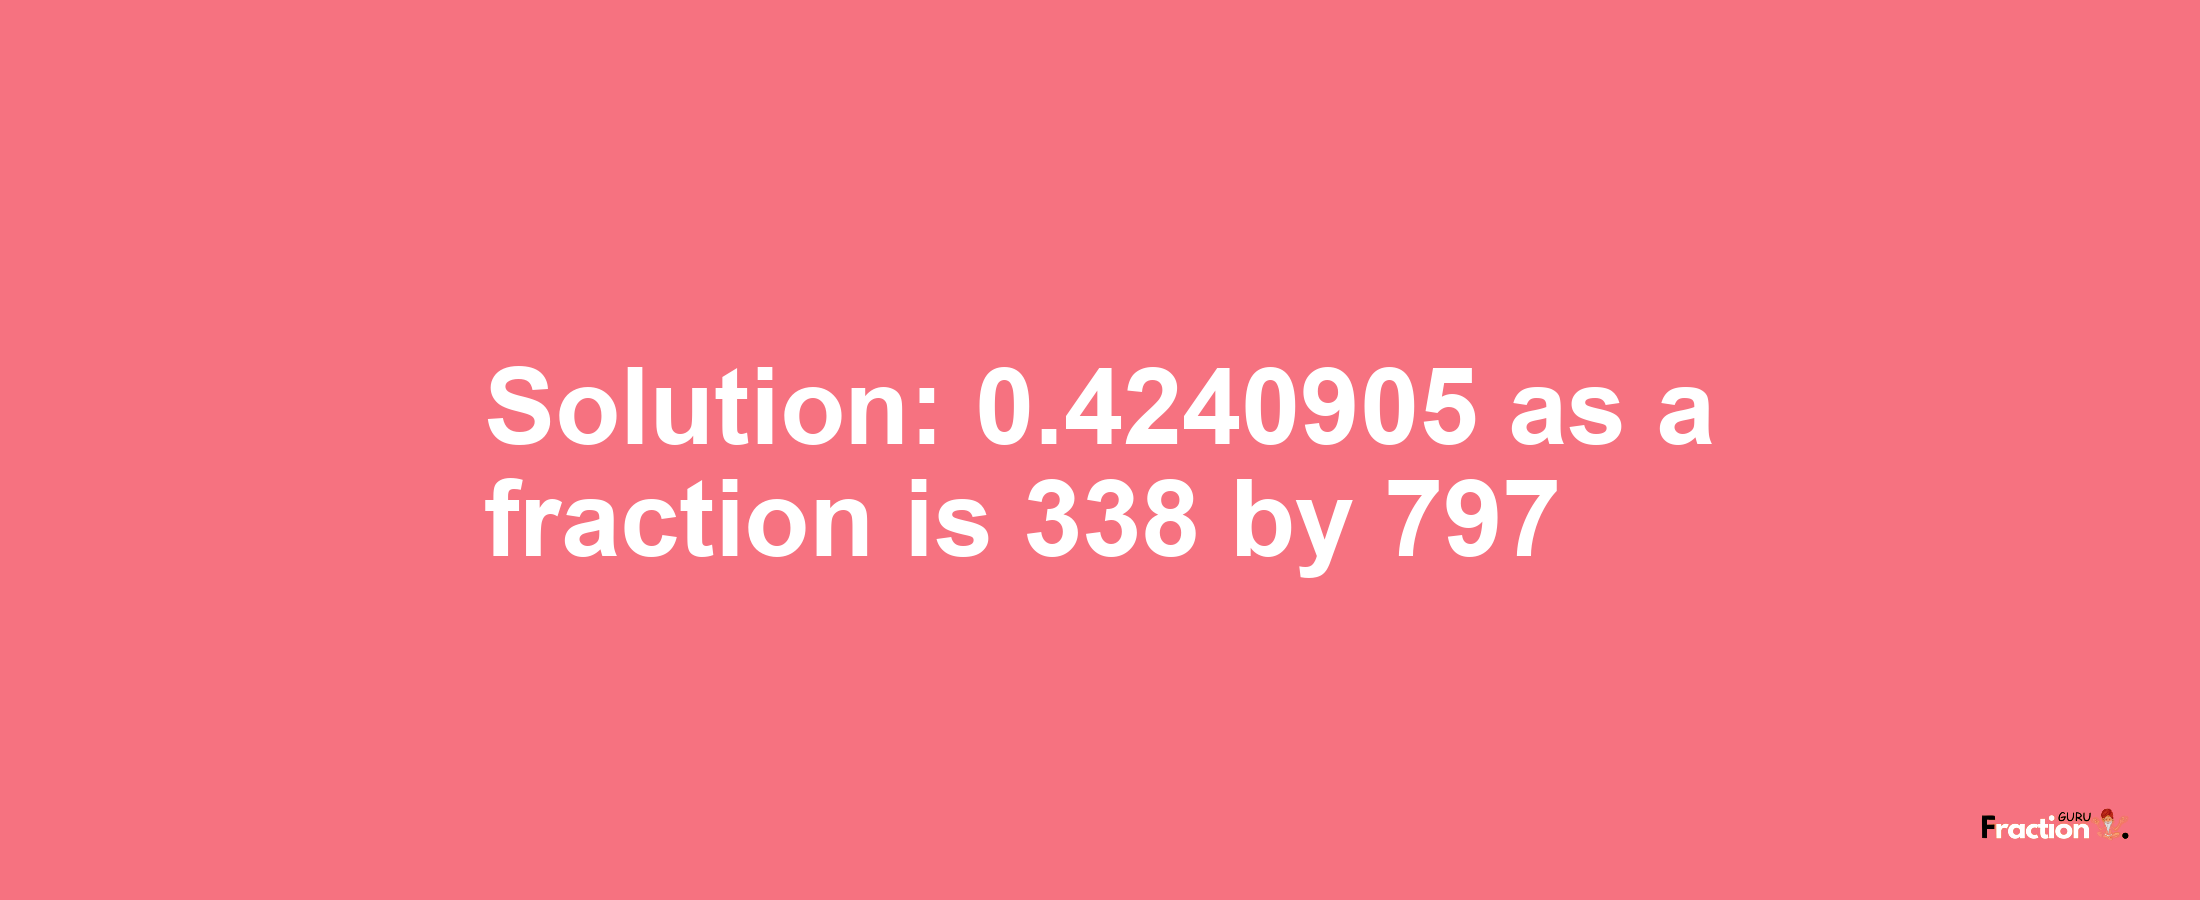 Solution:0.4240905 as a fraction is 338/797